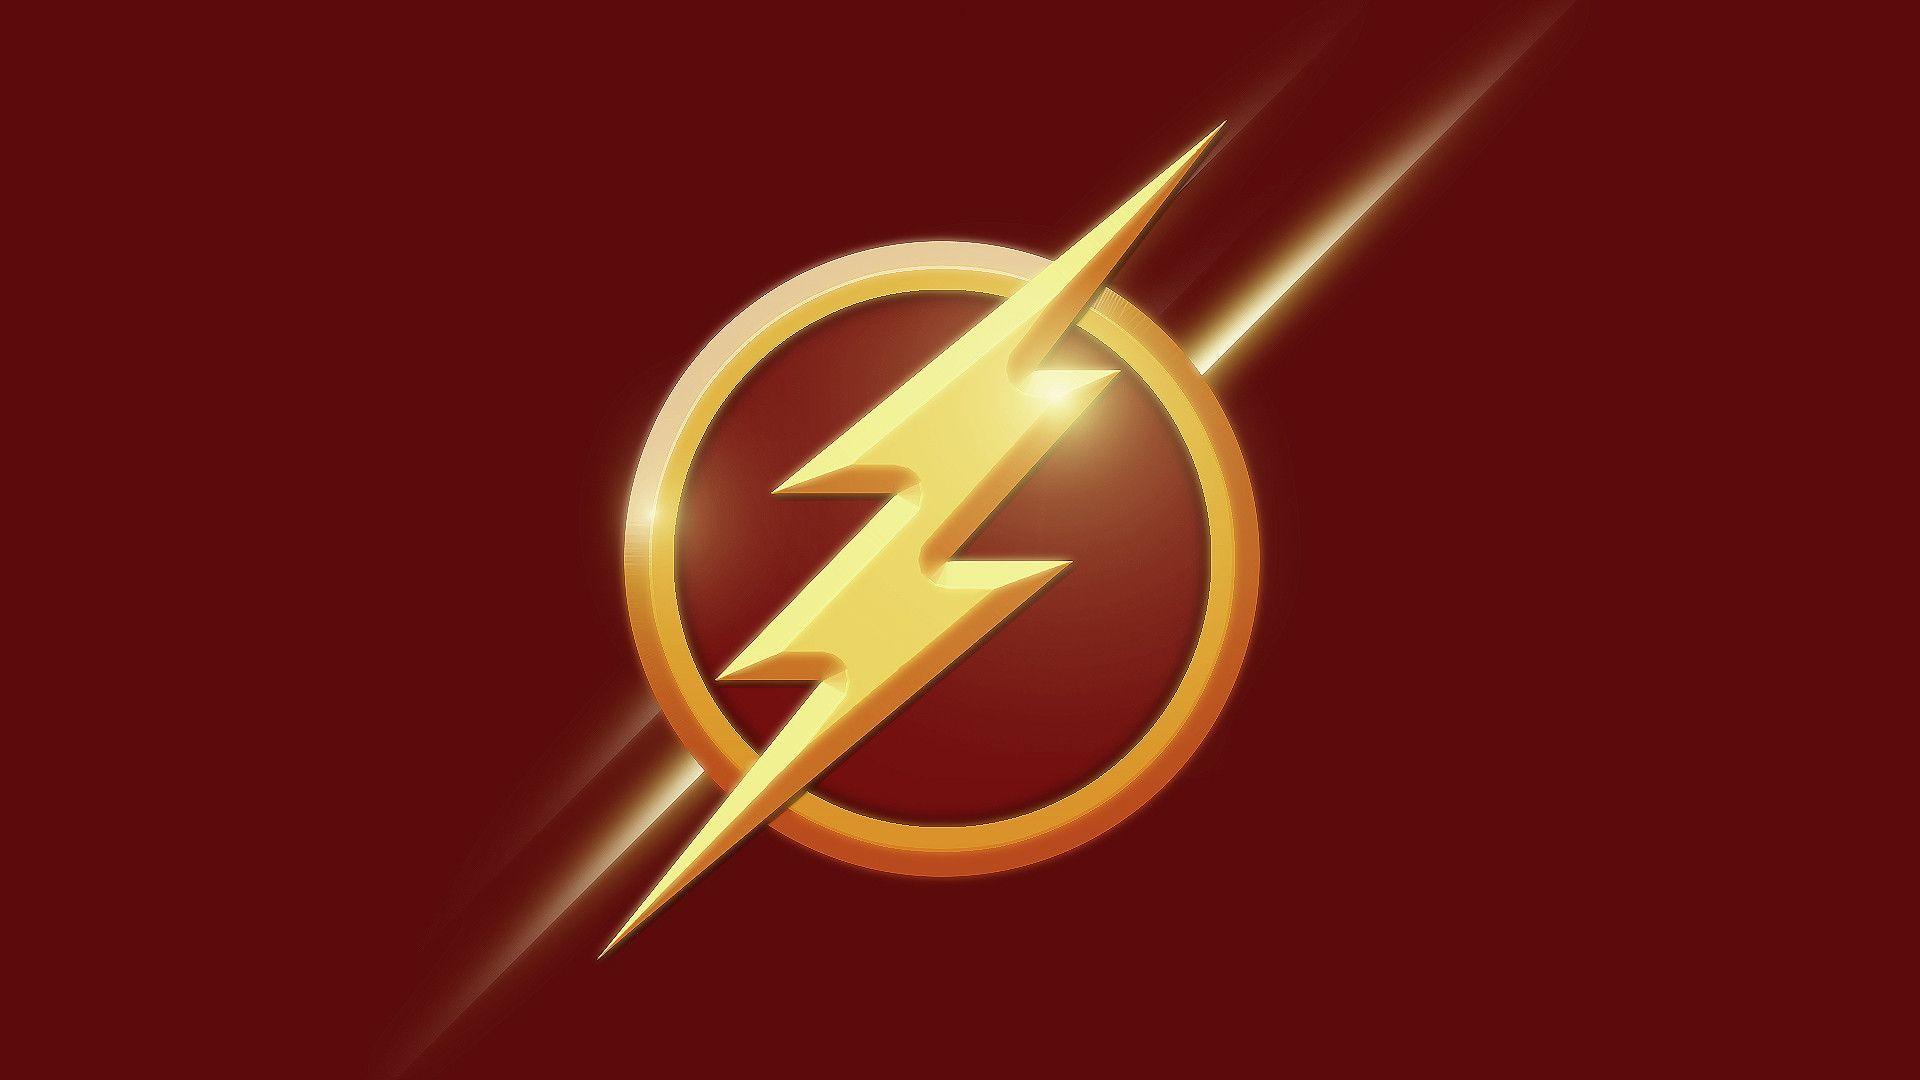 The Flash Phone Wallpapers